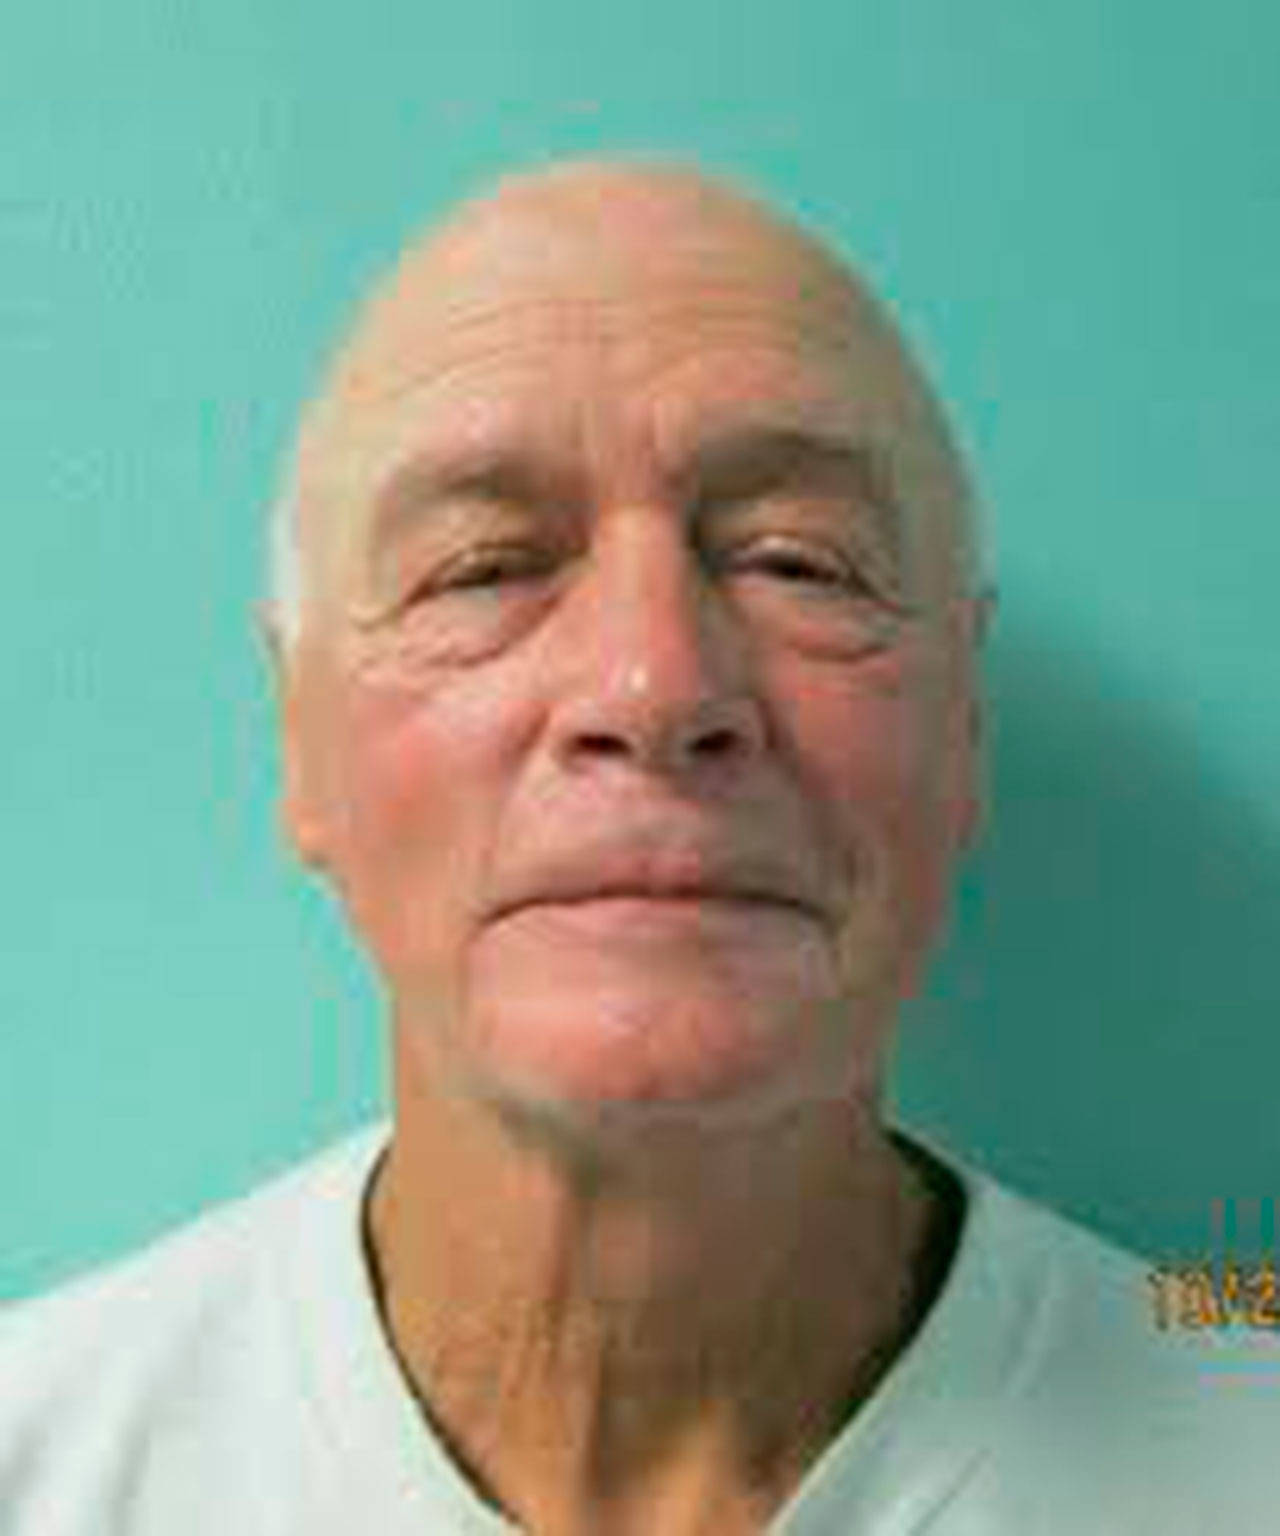 Lynn G. Johnson, 67, of Sequim faces multiple counts of rape and molestation charges after four teens accused him allegedly supplying them with money, alcohol, tobacco, and/or marijuana in exchange for sexual favors. Submitted photo